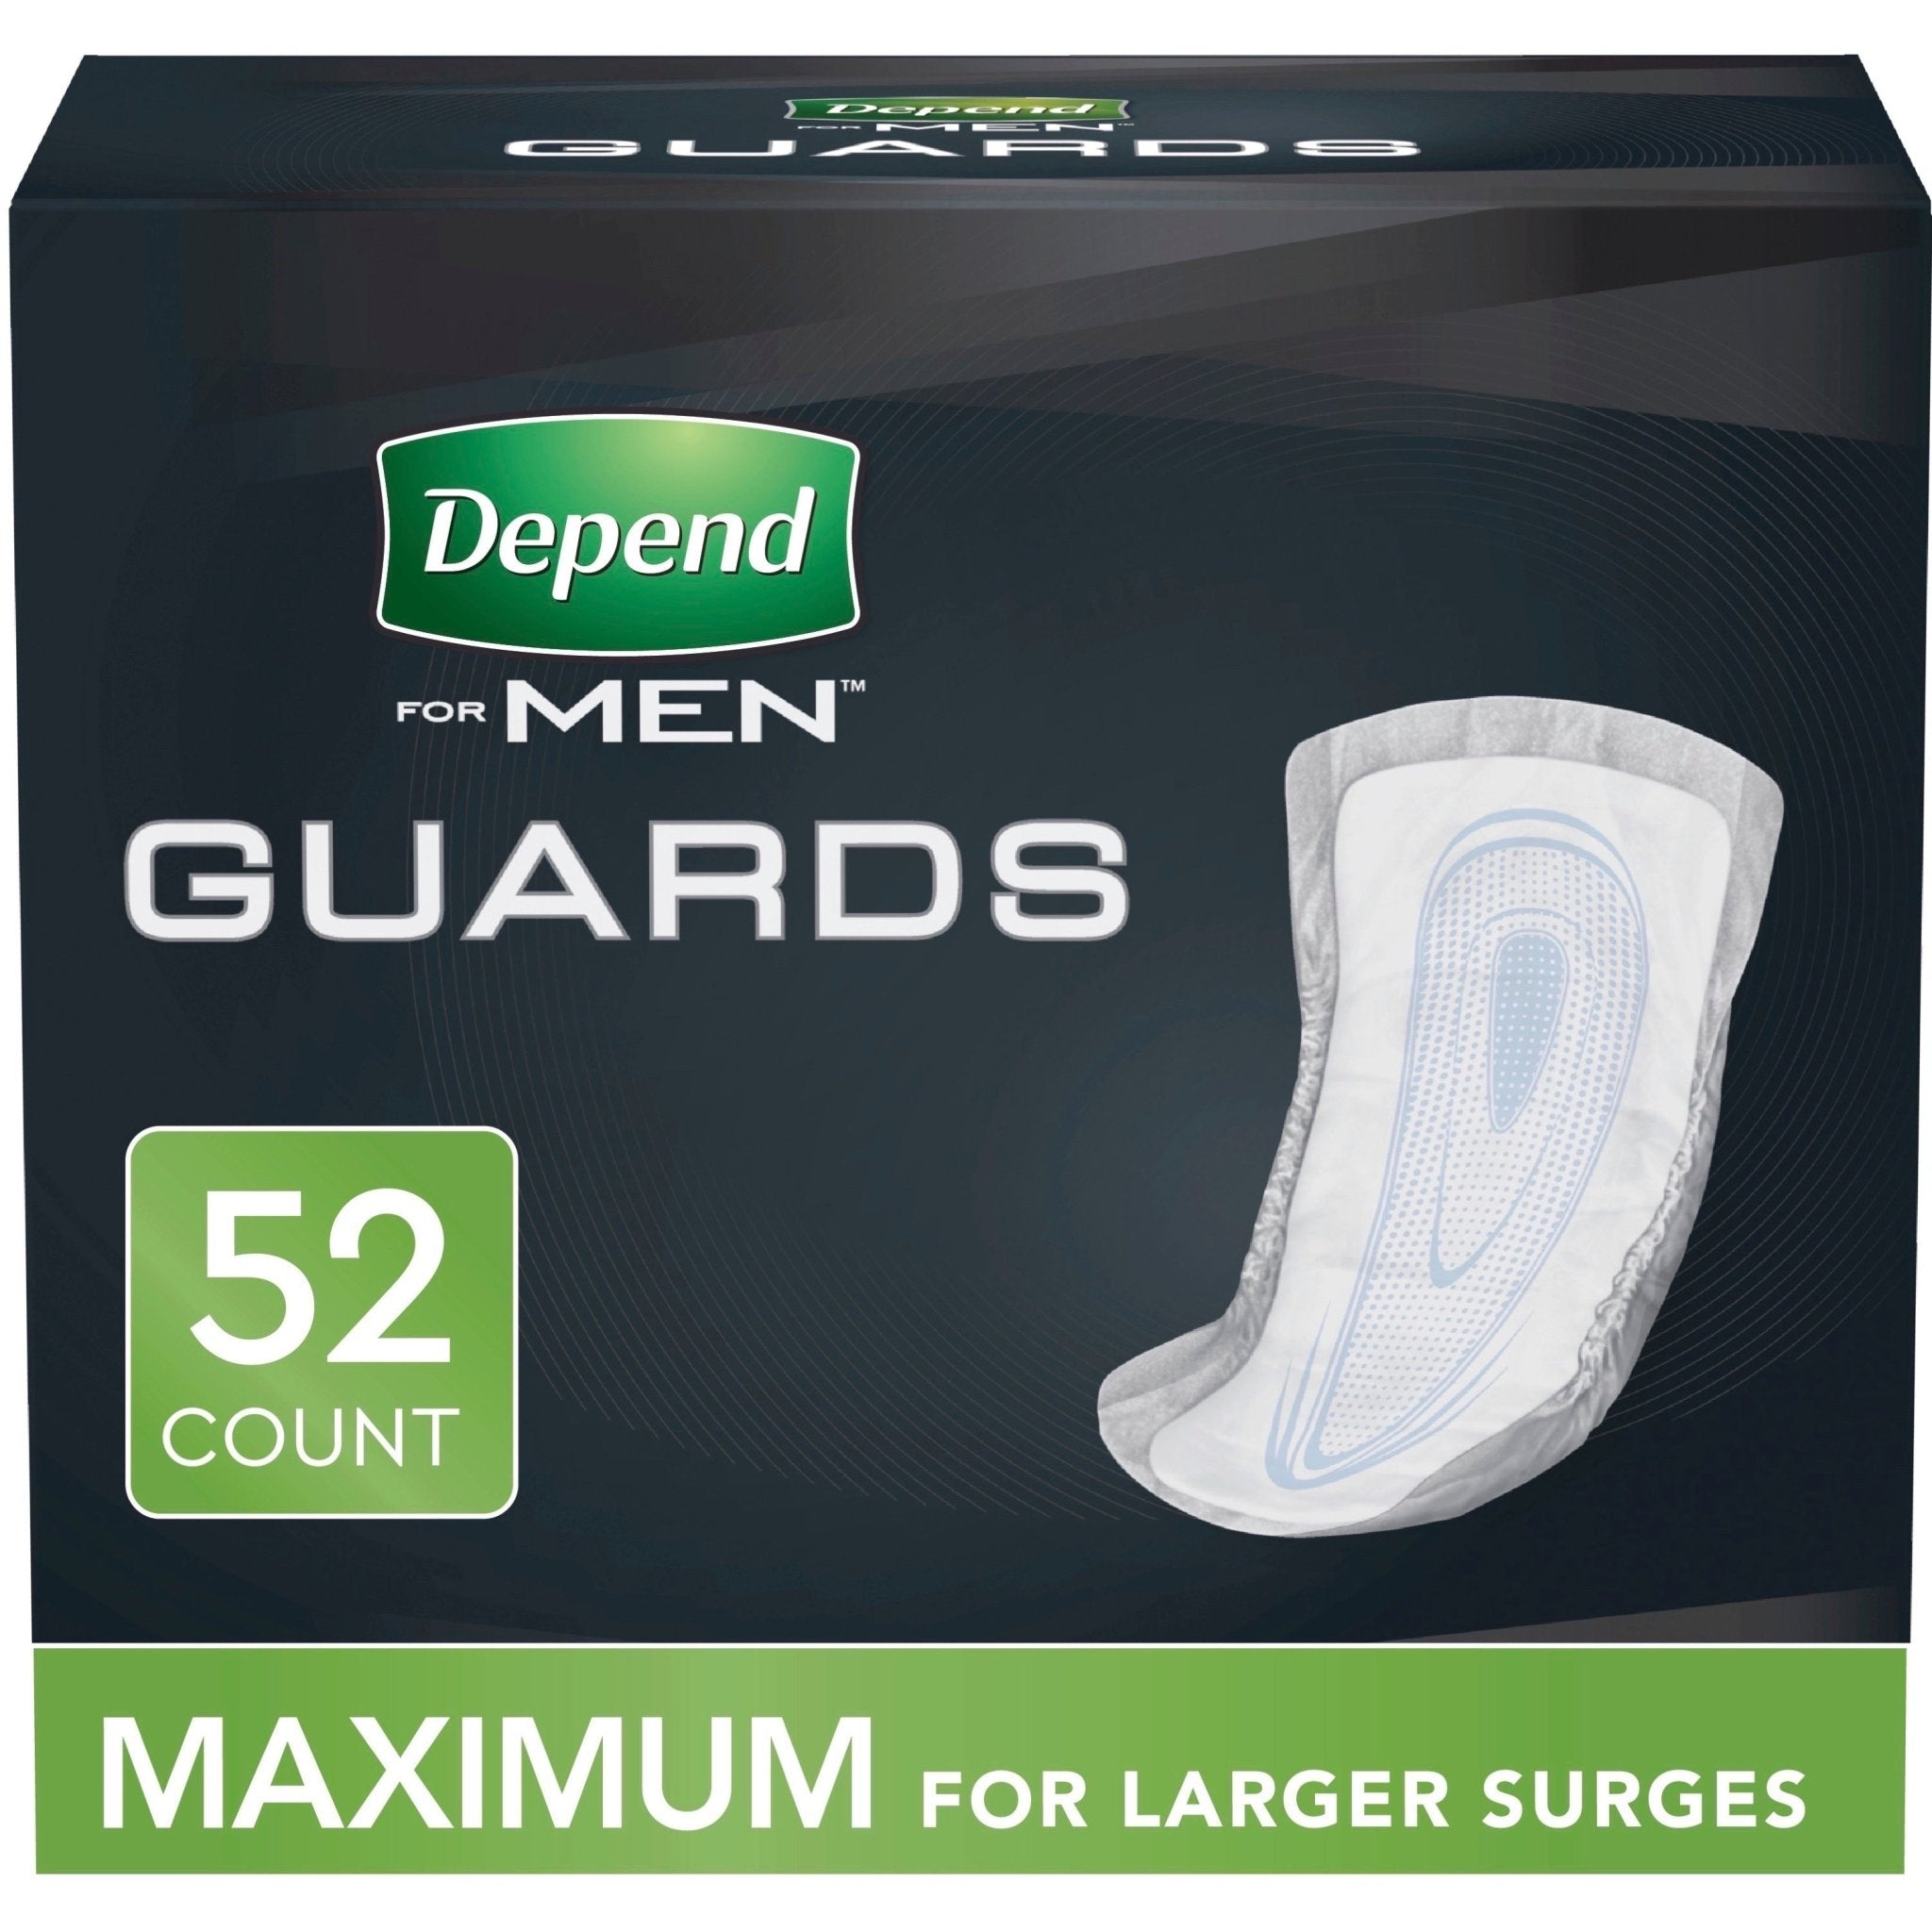 CA/104 - Depend Incontinence Guards for Men, Maximum Absorbency, (Packaging May Vary) - Best Buy Medical Supplies